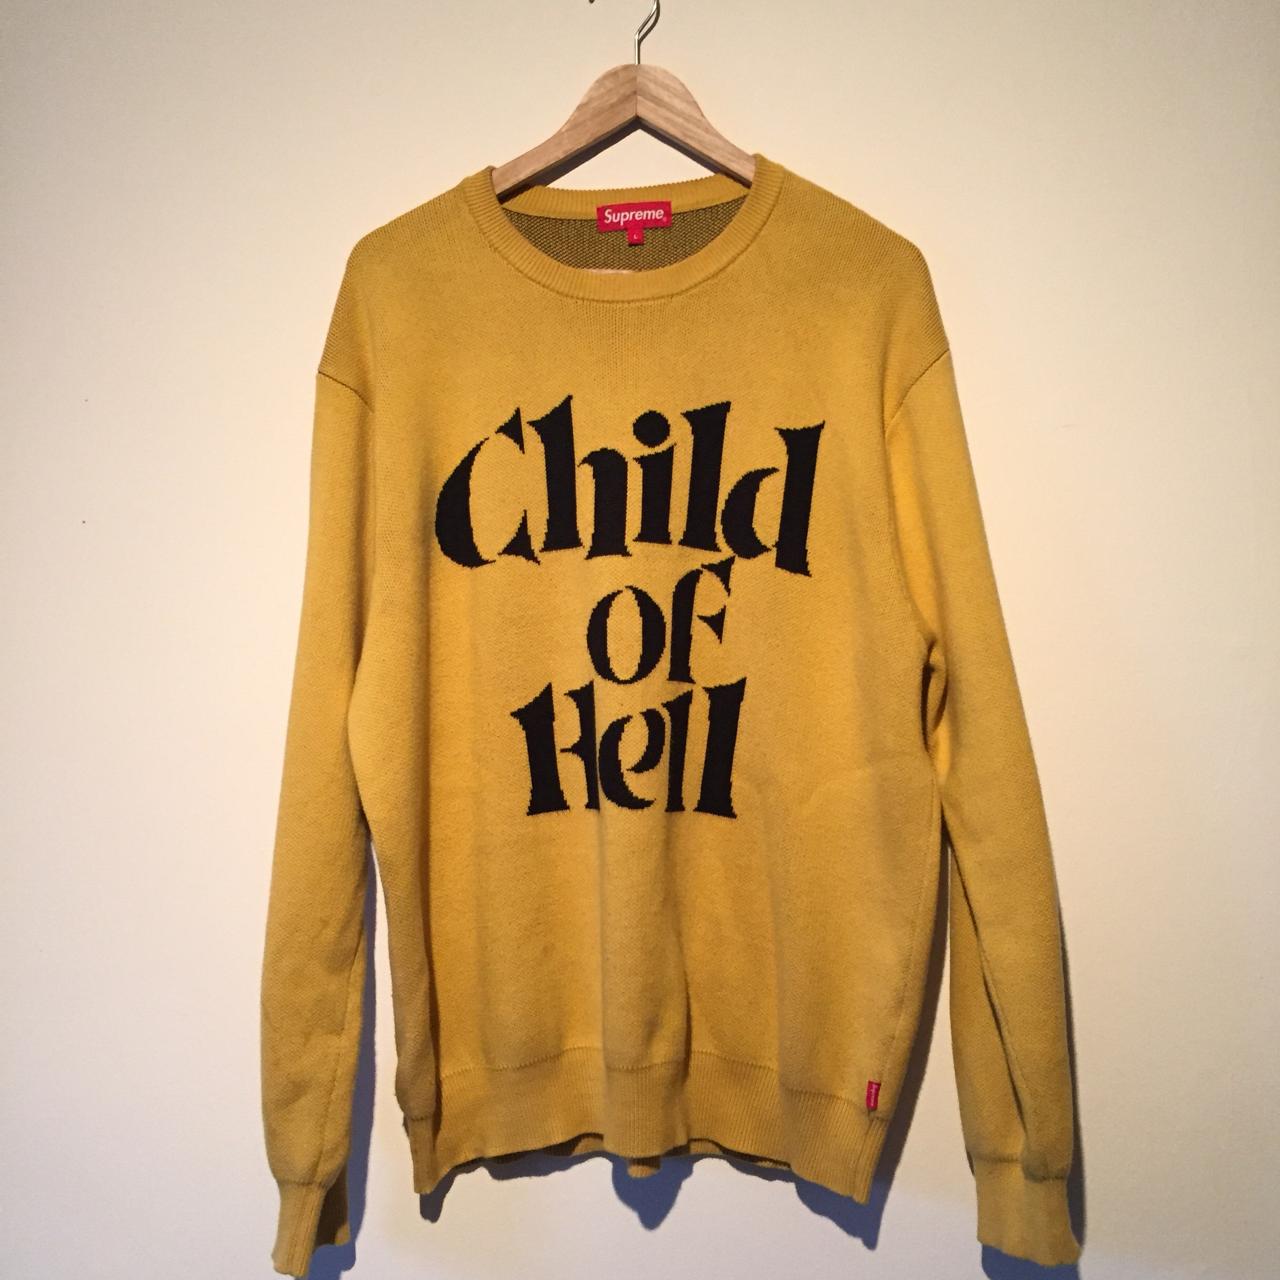 Supreme Child Of Hell Sweater - large - yellow /